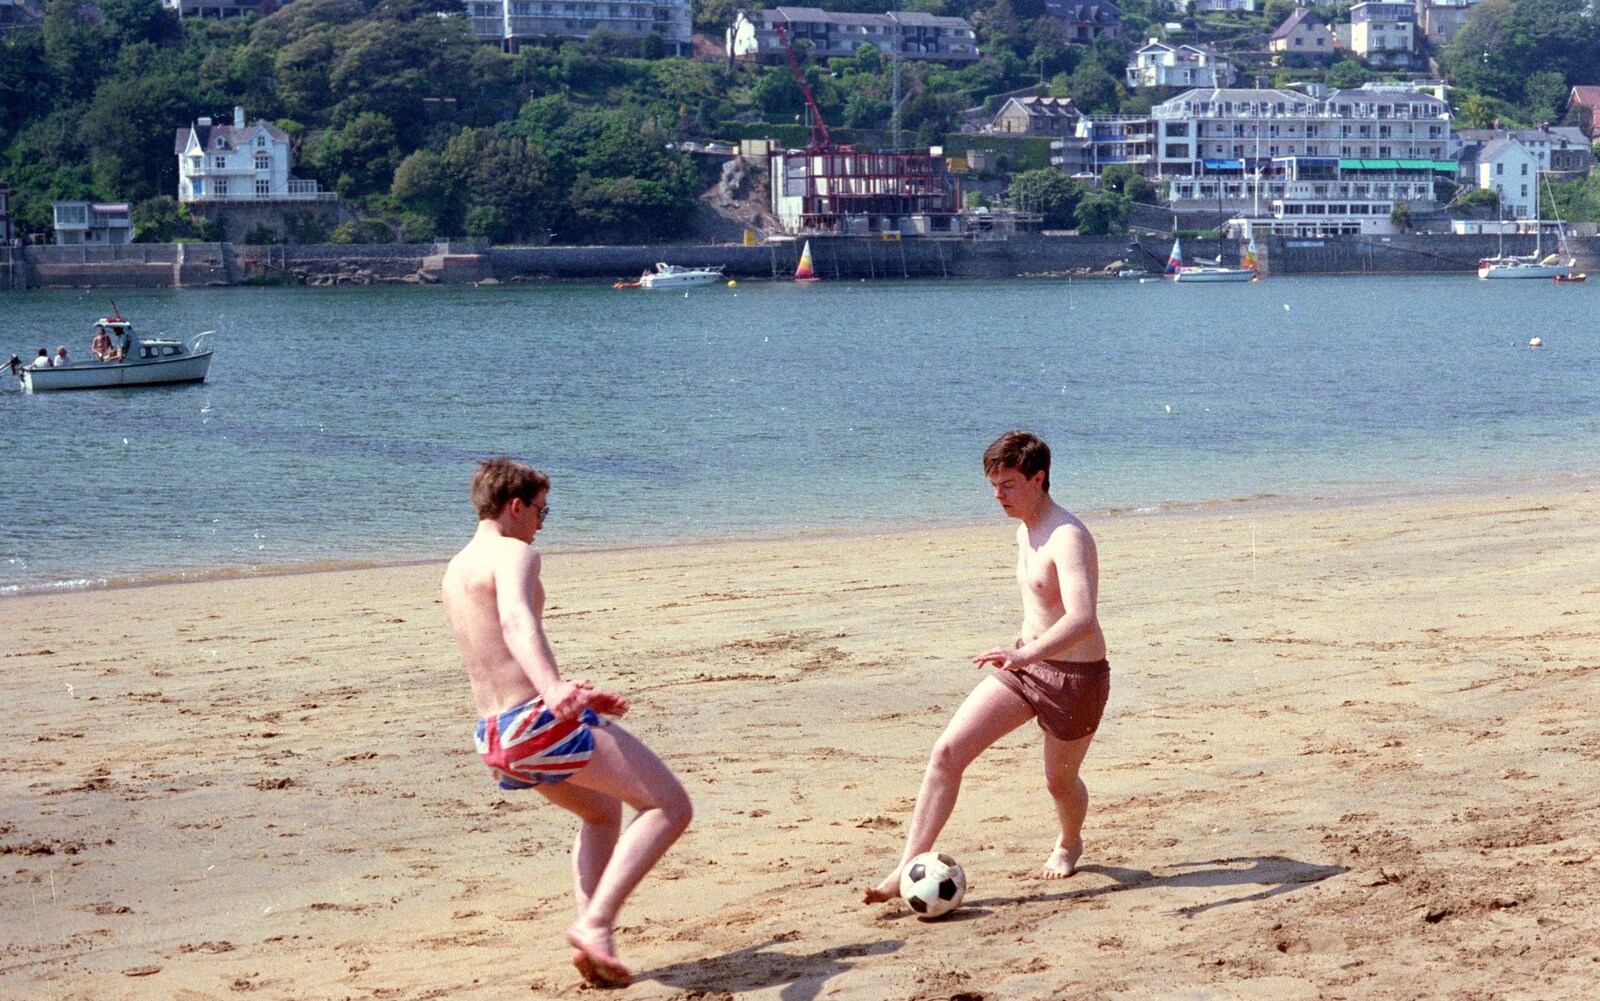 Dave's on the ball from Uni: Twenty One Guns and Footie on the Beach, Plymouth Hoe and Salcombe, Devon - 15th June 1986